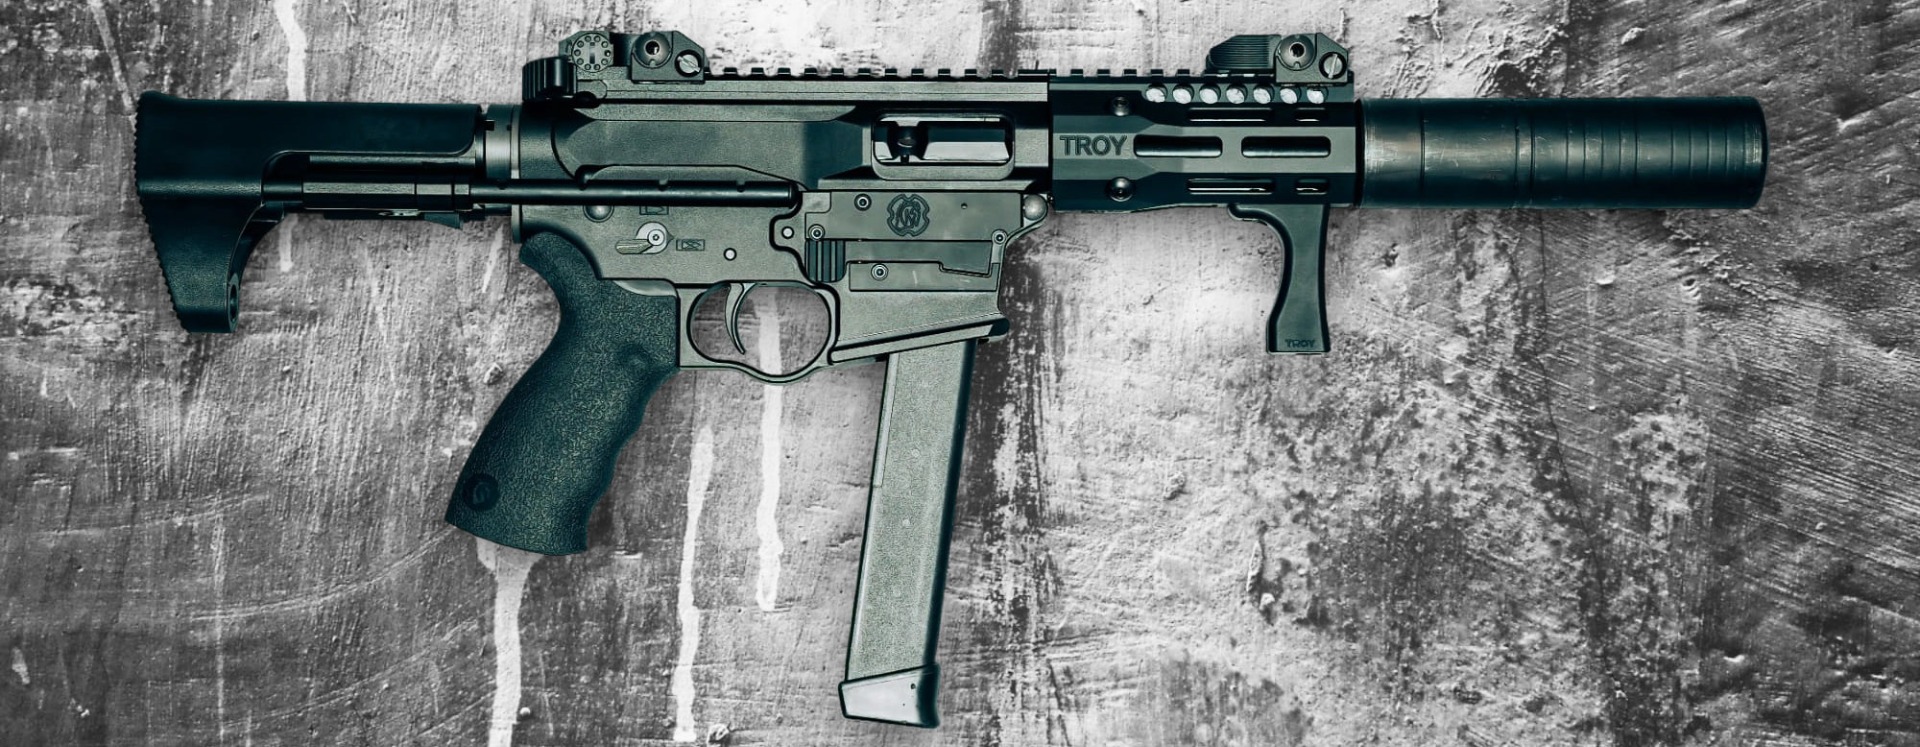 Troy Industries SBR (PDW?) with various AR accessories aboard. 